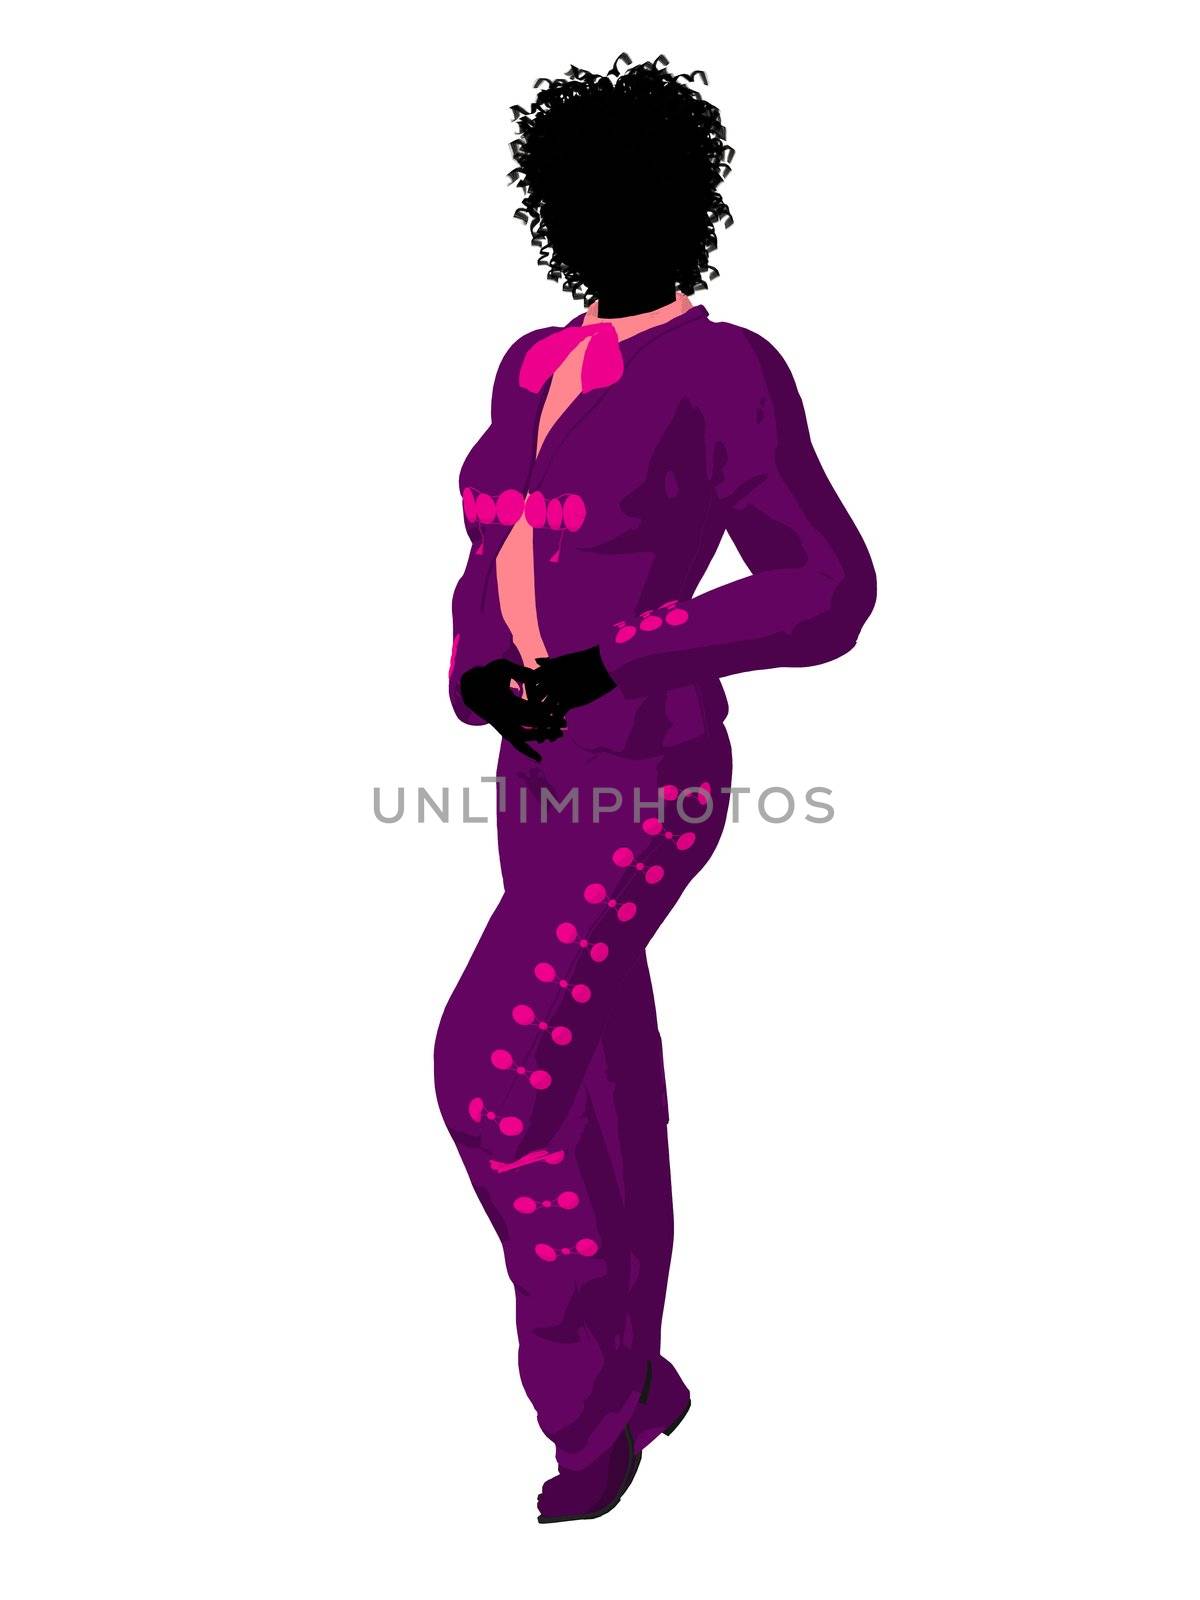 African American Female Mariachi Silhouette Illustration by kathygold